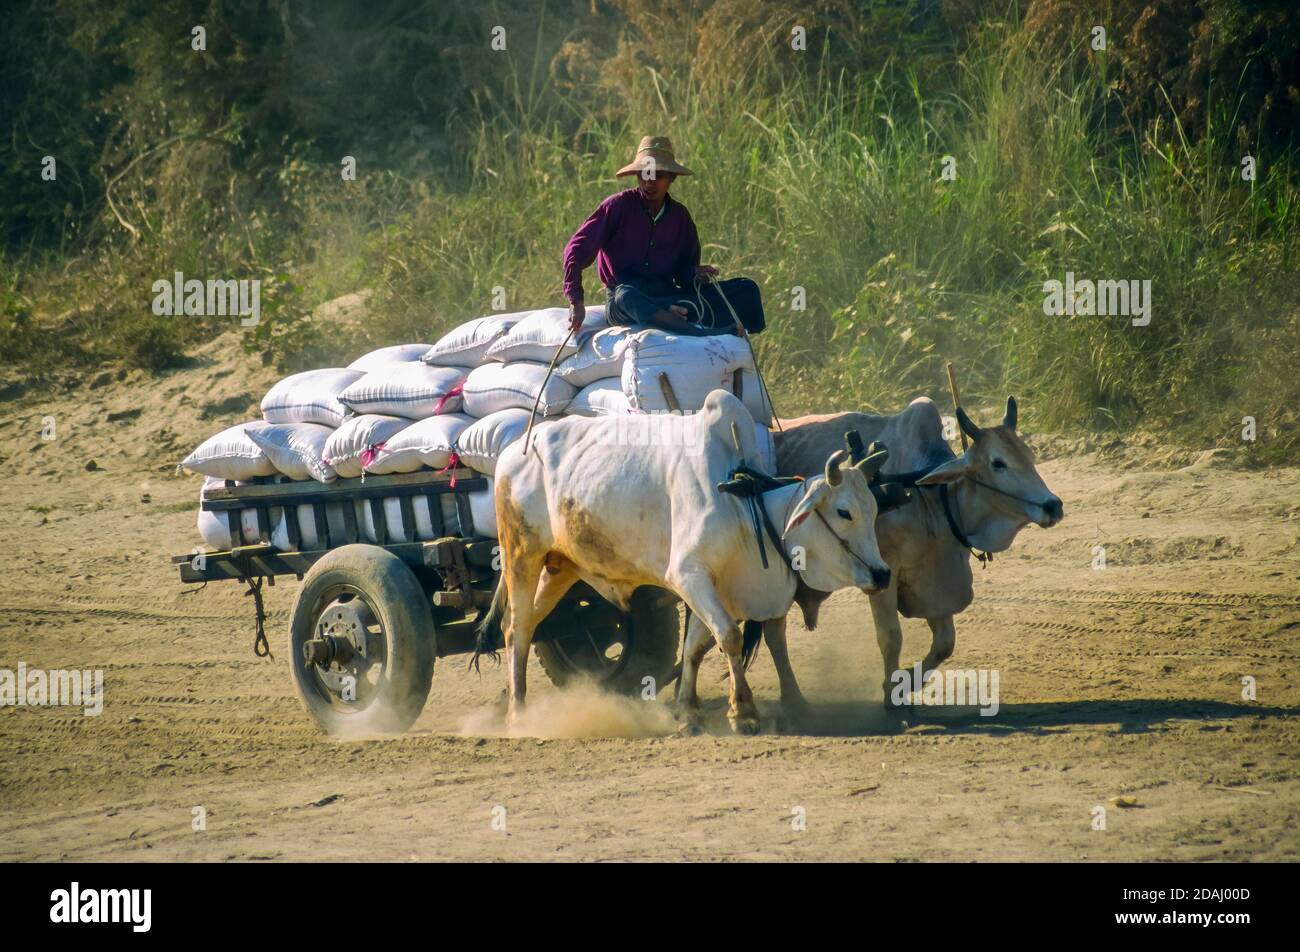 A local man rides a traditional bullock cart carrying stacks in a cloud of dust on the riverbank of the Irrawaddy River, Myanmar (Burma) Stock Photo